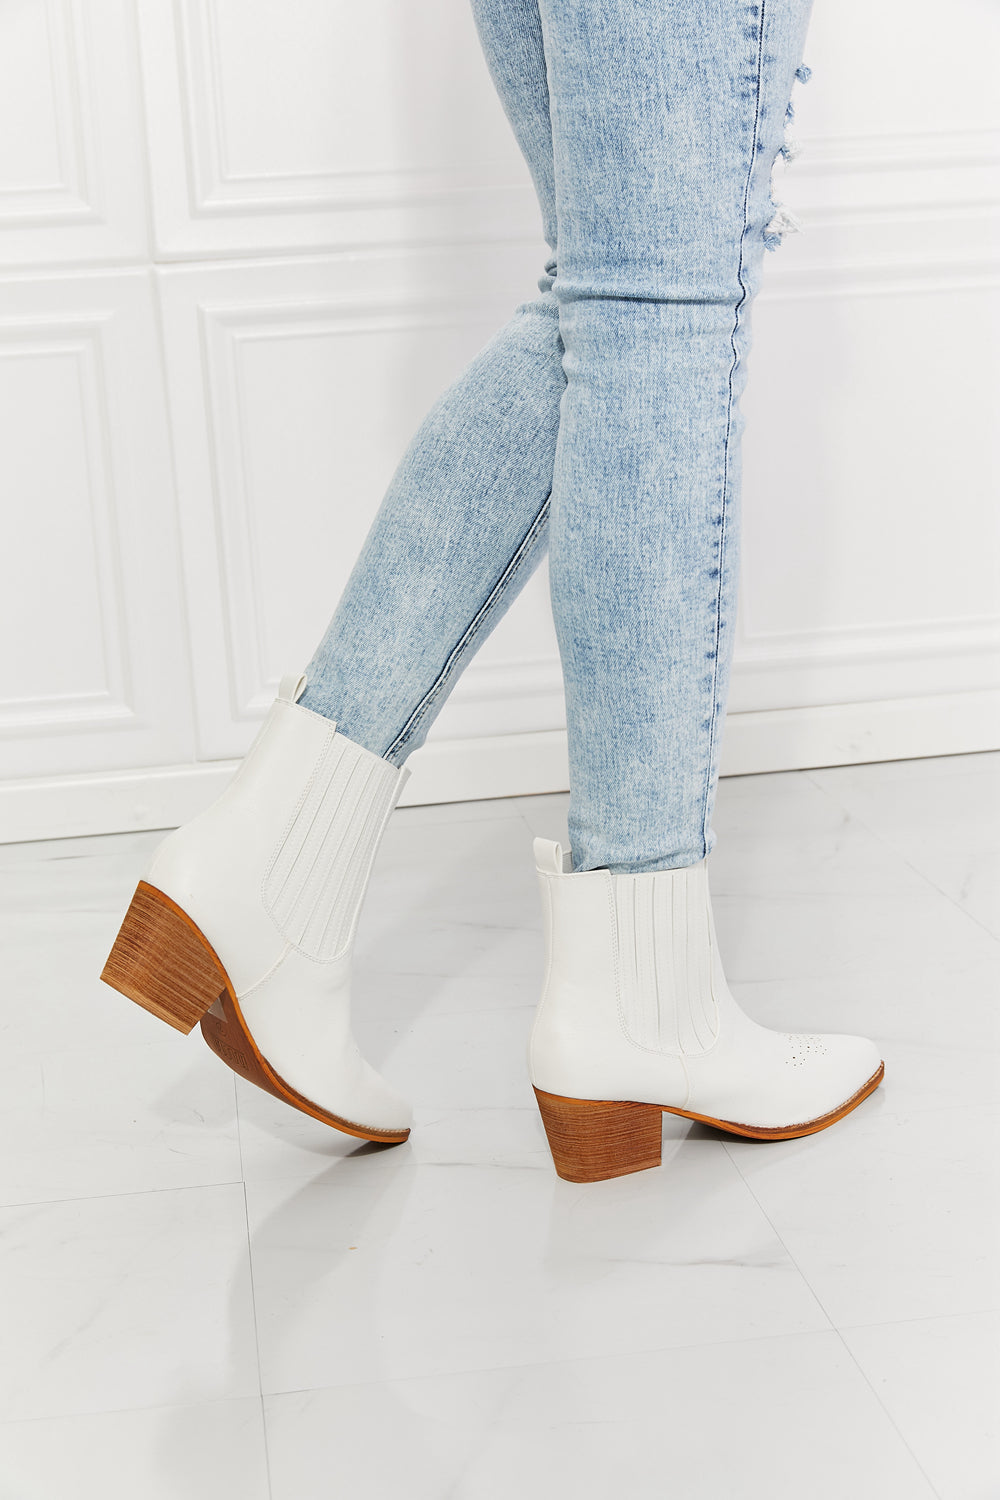 MMShoes Love the Journey Stacked Heel Chelsea Boot in White